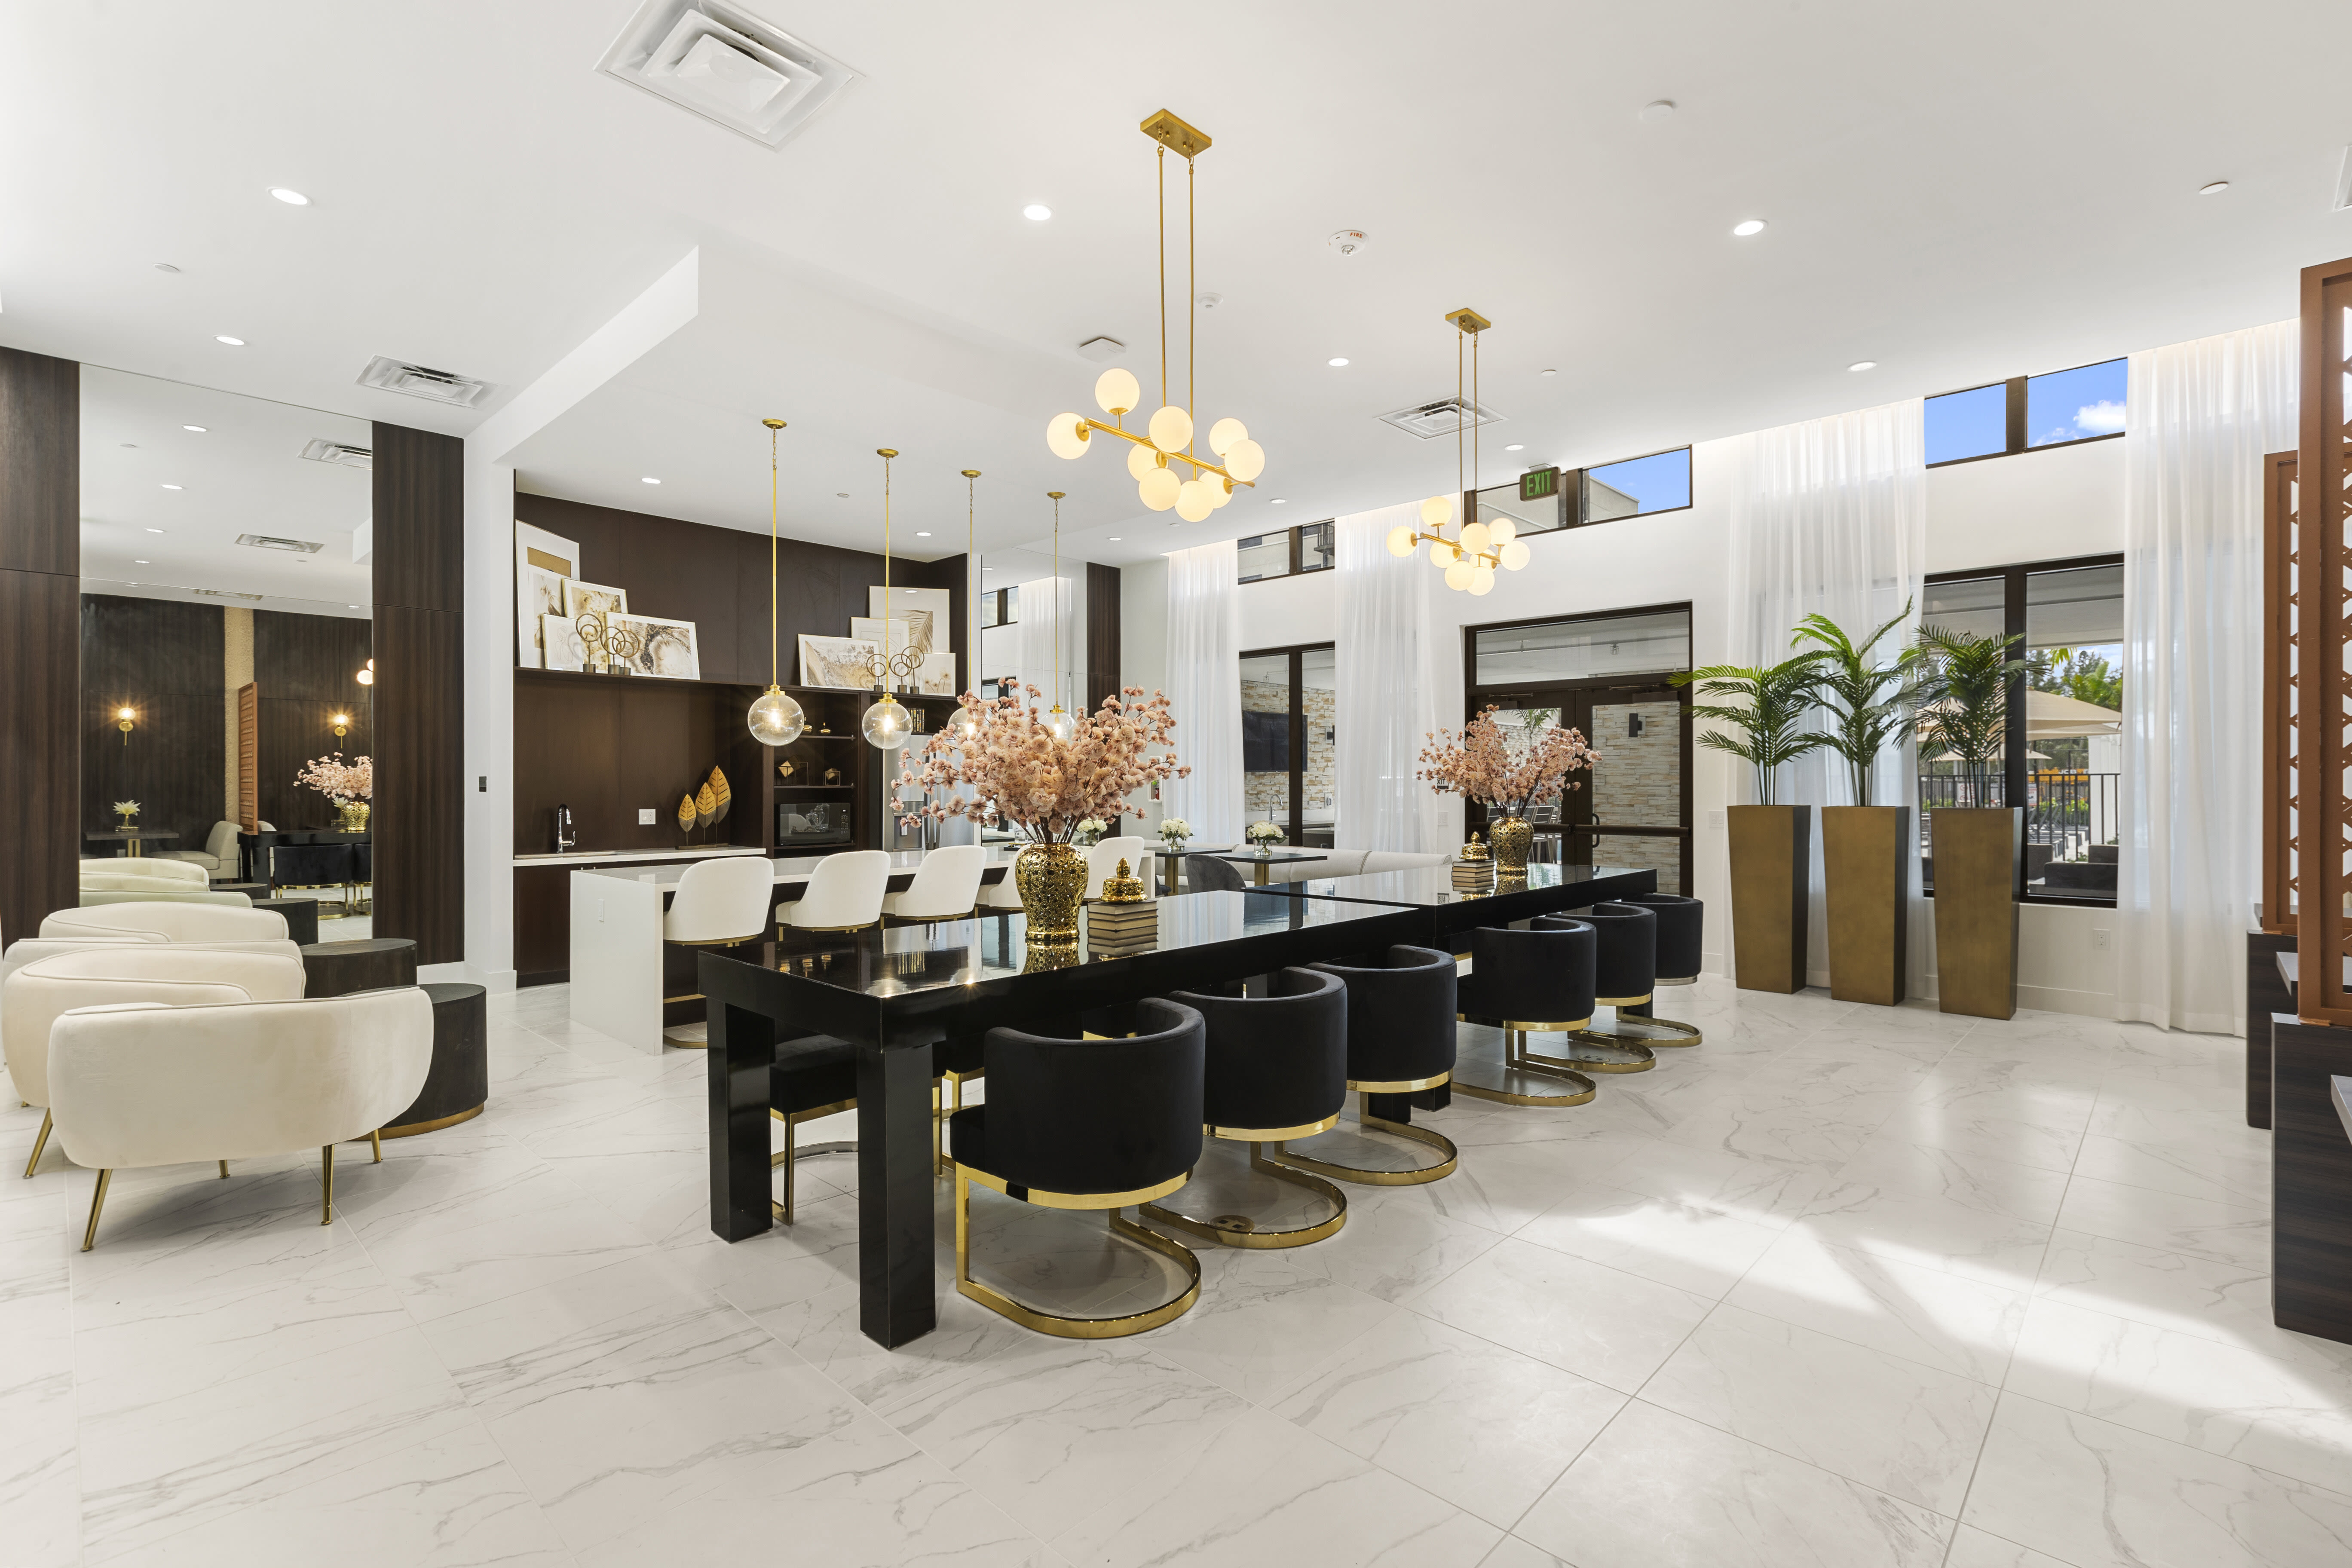 Luxurious clubhouse with high-end lighting, inviting seating, and modern furnishings at Pine Ridge, West Palm Beach, Florida